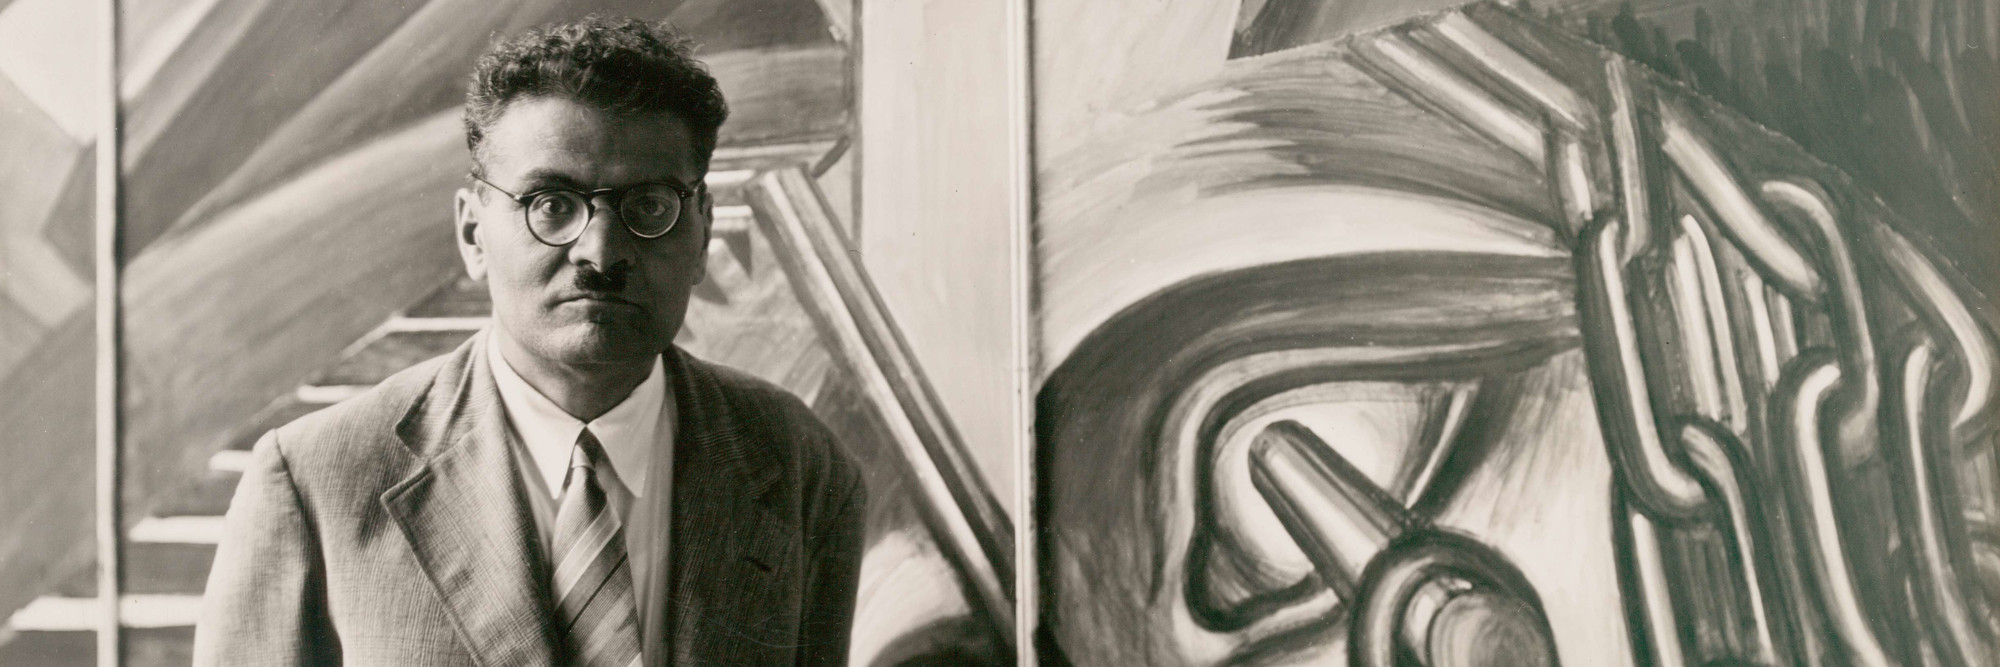 José Clemente Orozco with his fresco &#34;Dive Bomber and Tank,&#34; commissioned by MoMA during the exhibition &#34;Twenty Centuries of Mexican Art,&#34; May 15–September 30, 1940. Photographic Archive. The Museum of Modern Art Archives, New York